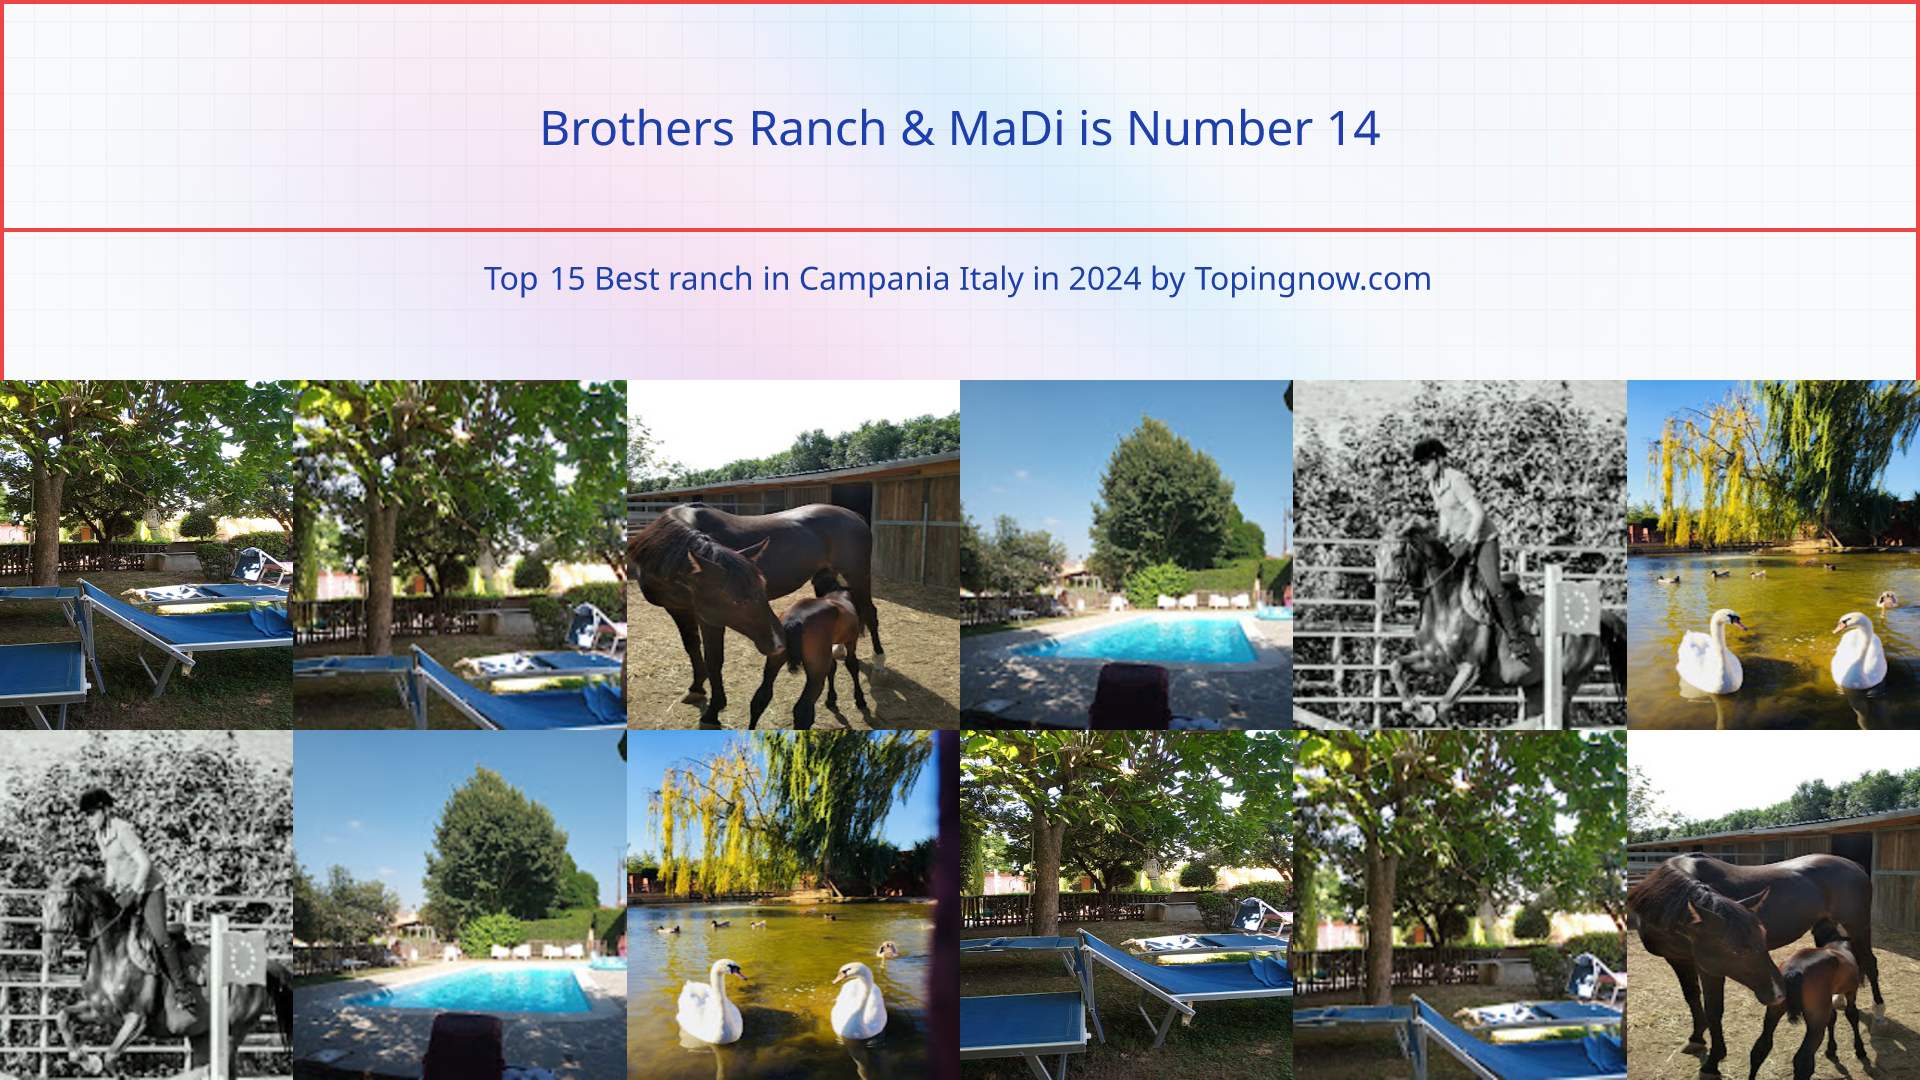 Brothers Ranch & MaDi: Top 15 Best ranch in Campania Italy in 2024